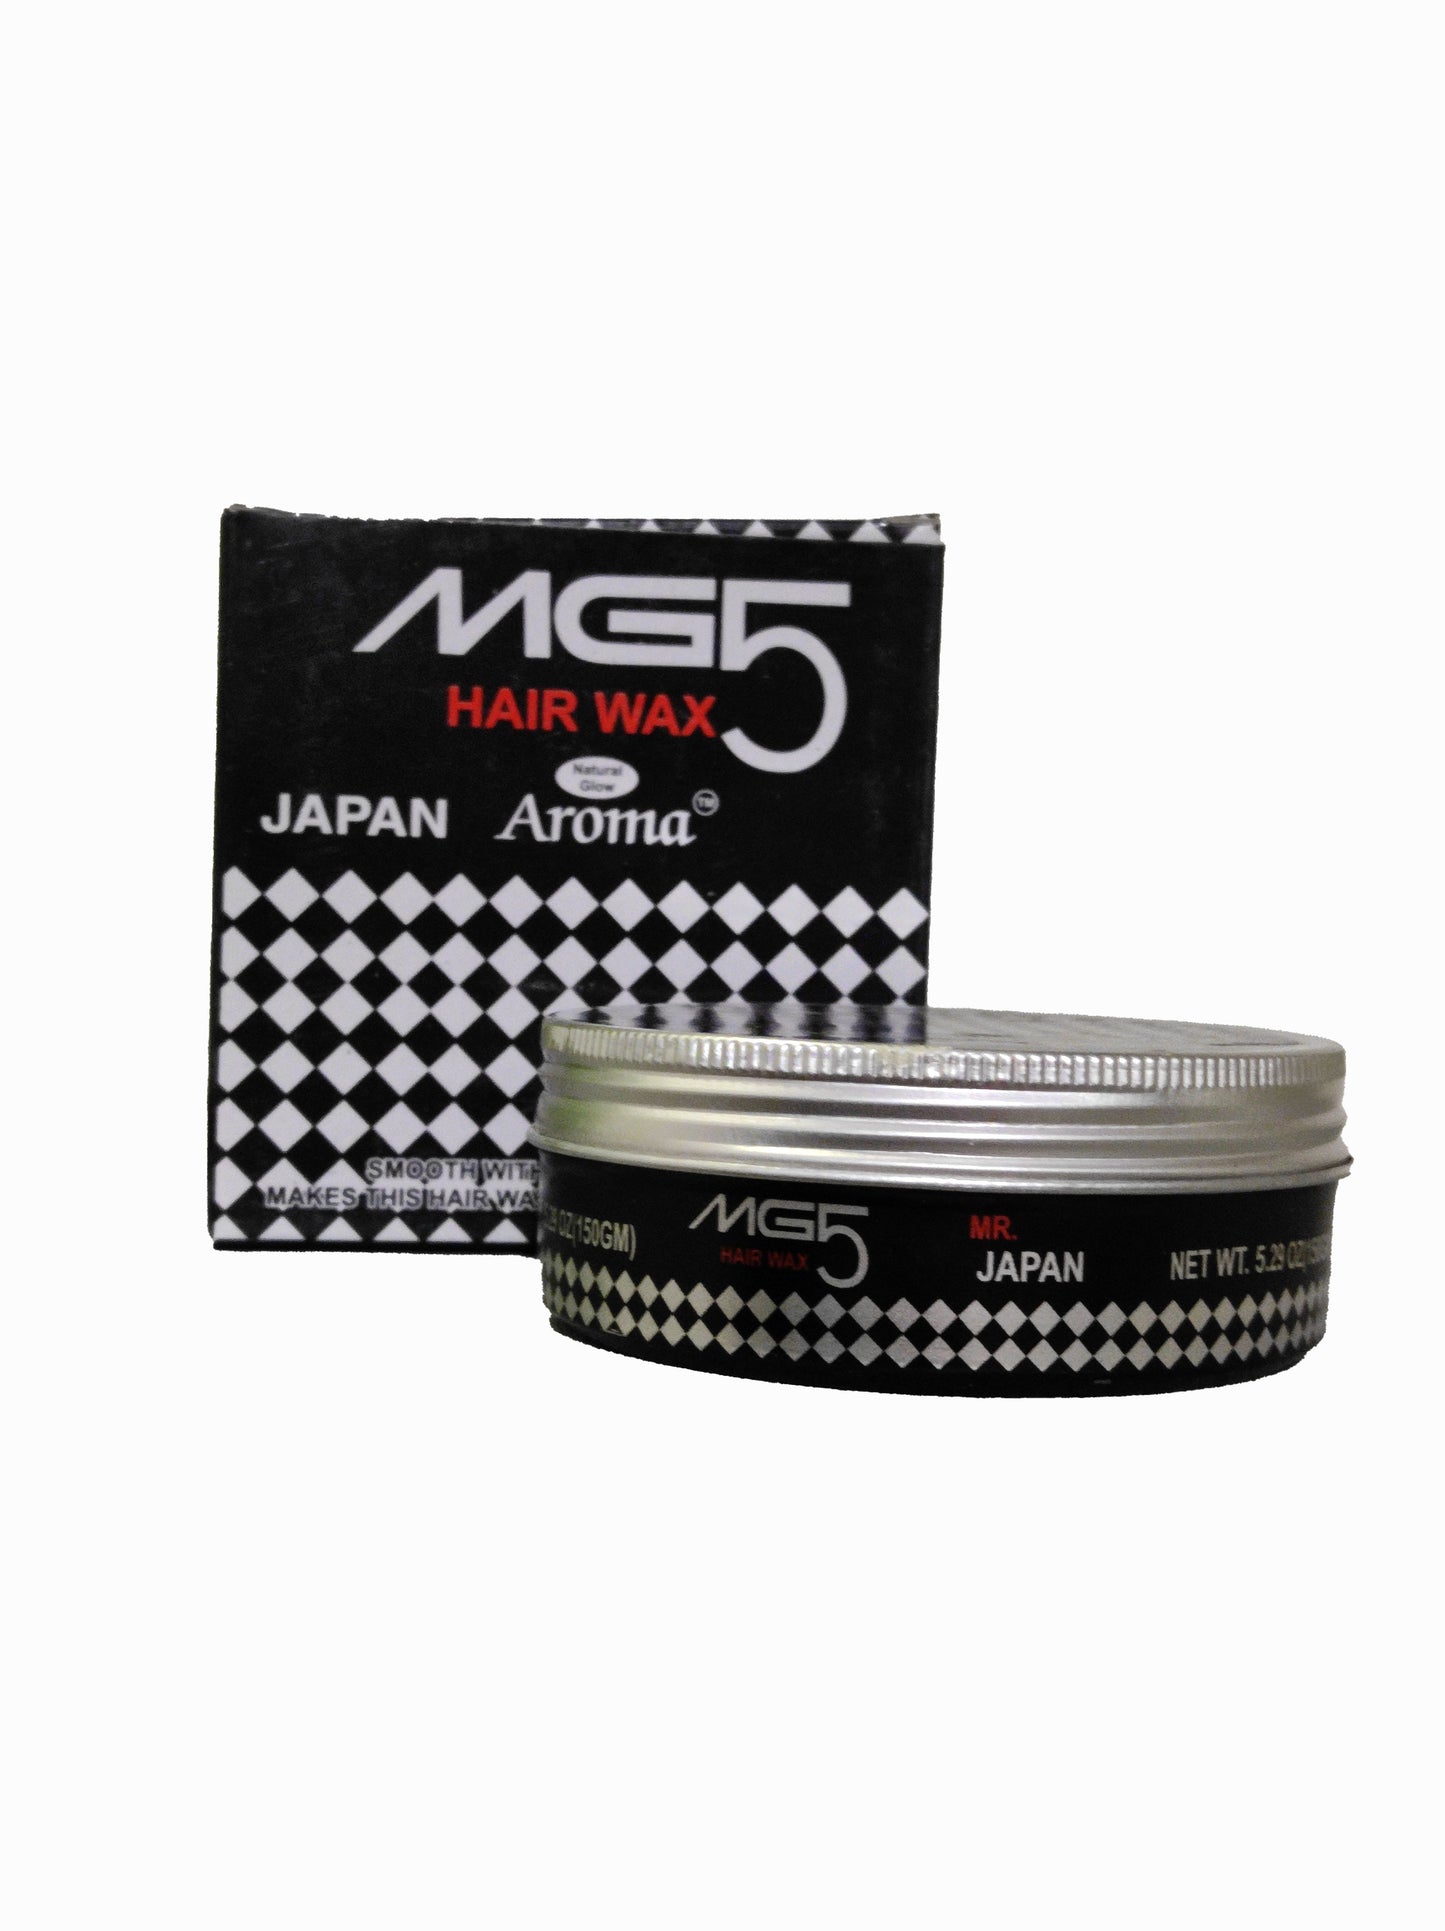 MG5 Hair Wax review  MG 5 wax is GOOD or NOT Side Effects  QualityMantra   YouTube